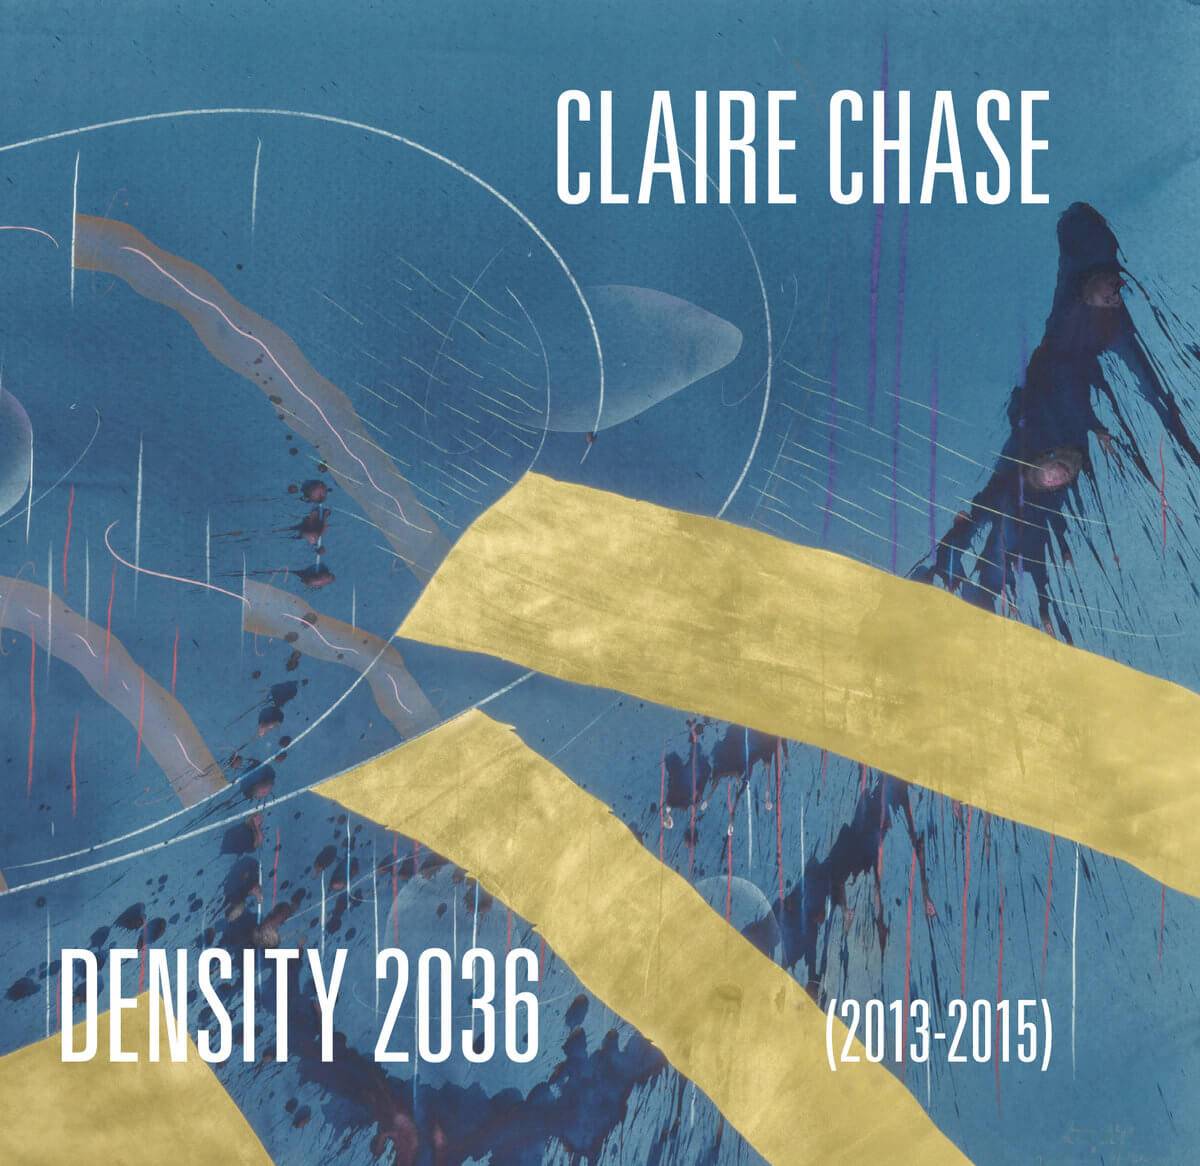 claire-chase-destiny-2036-2013-2015-cover